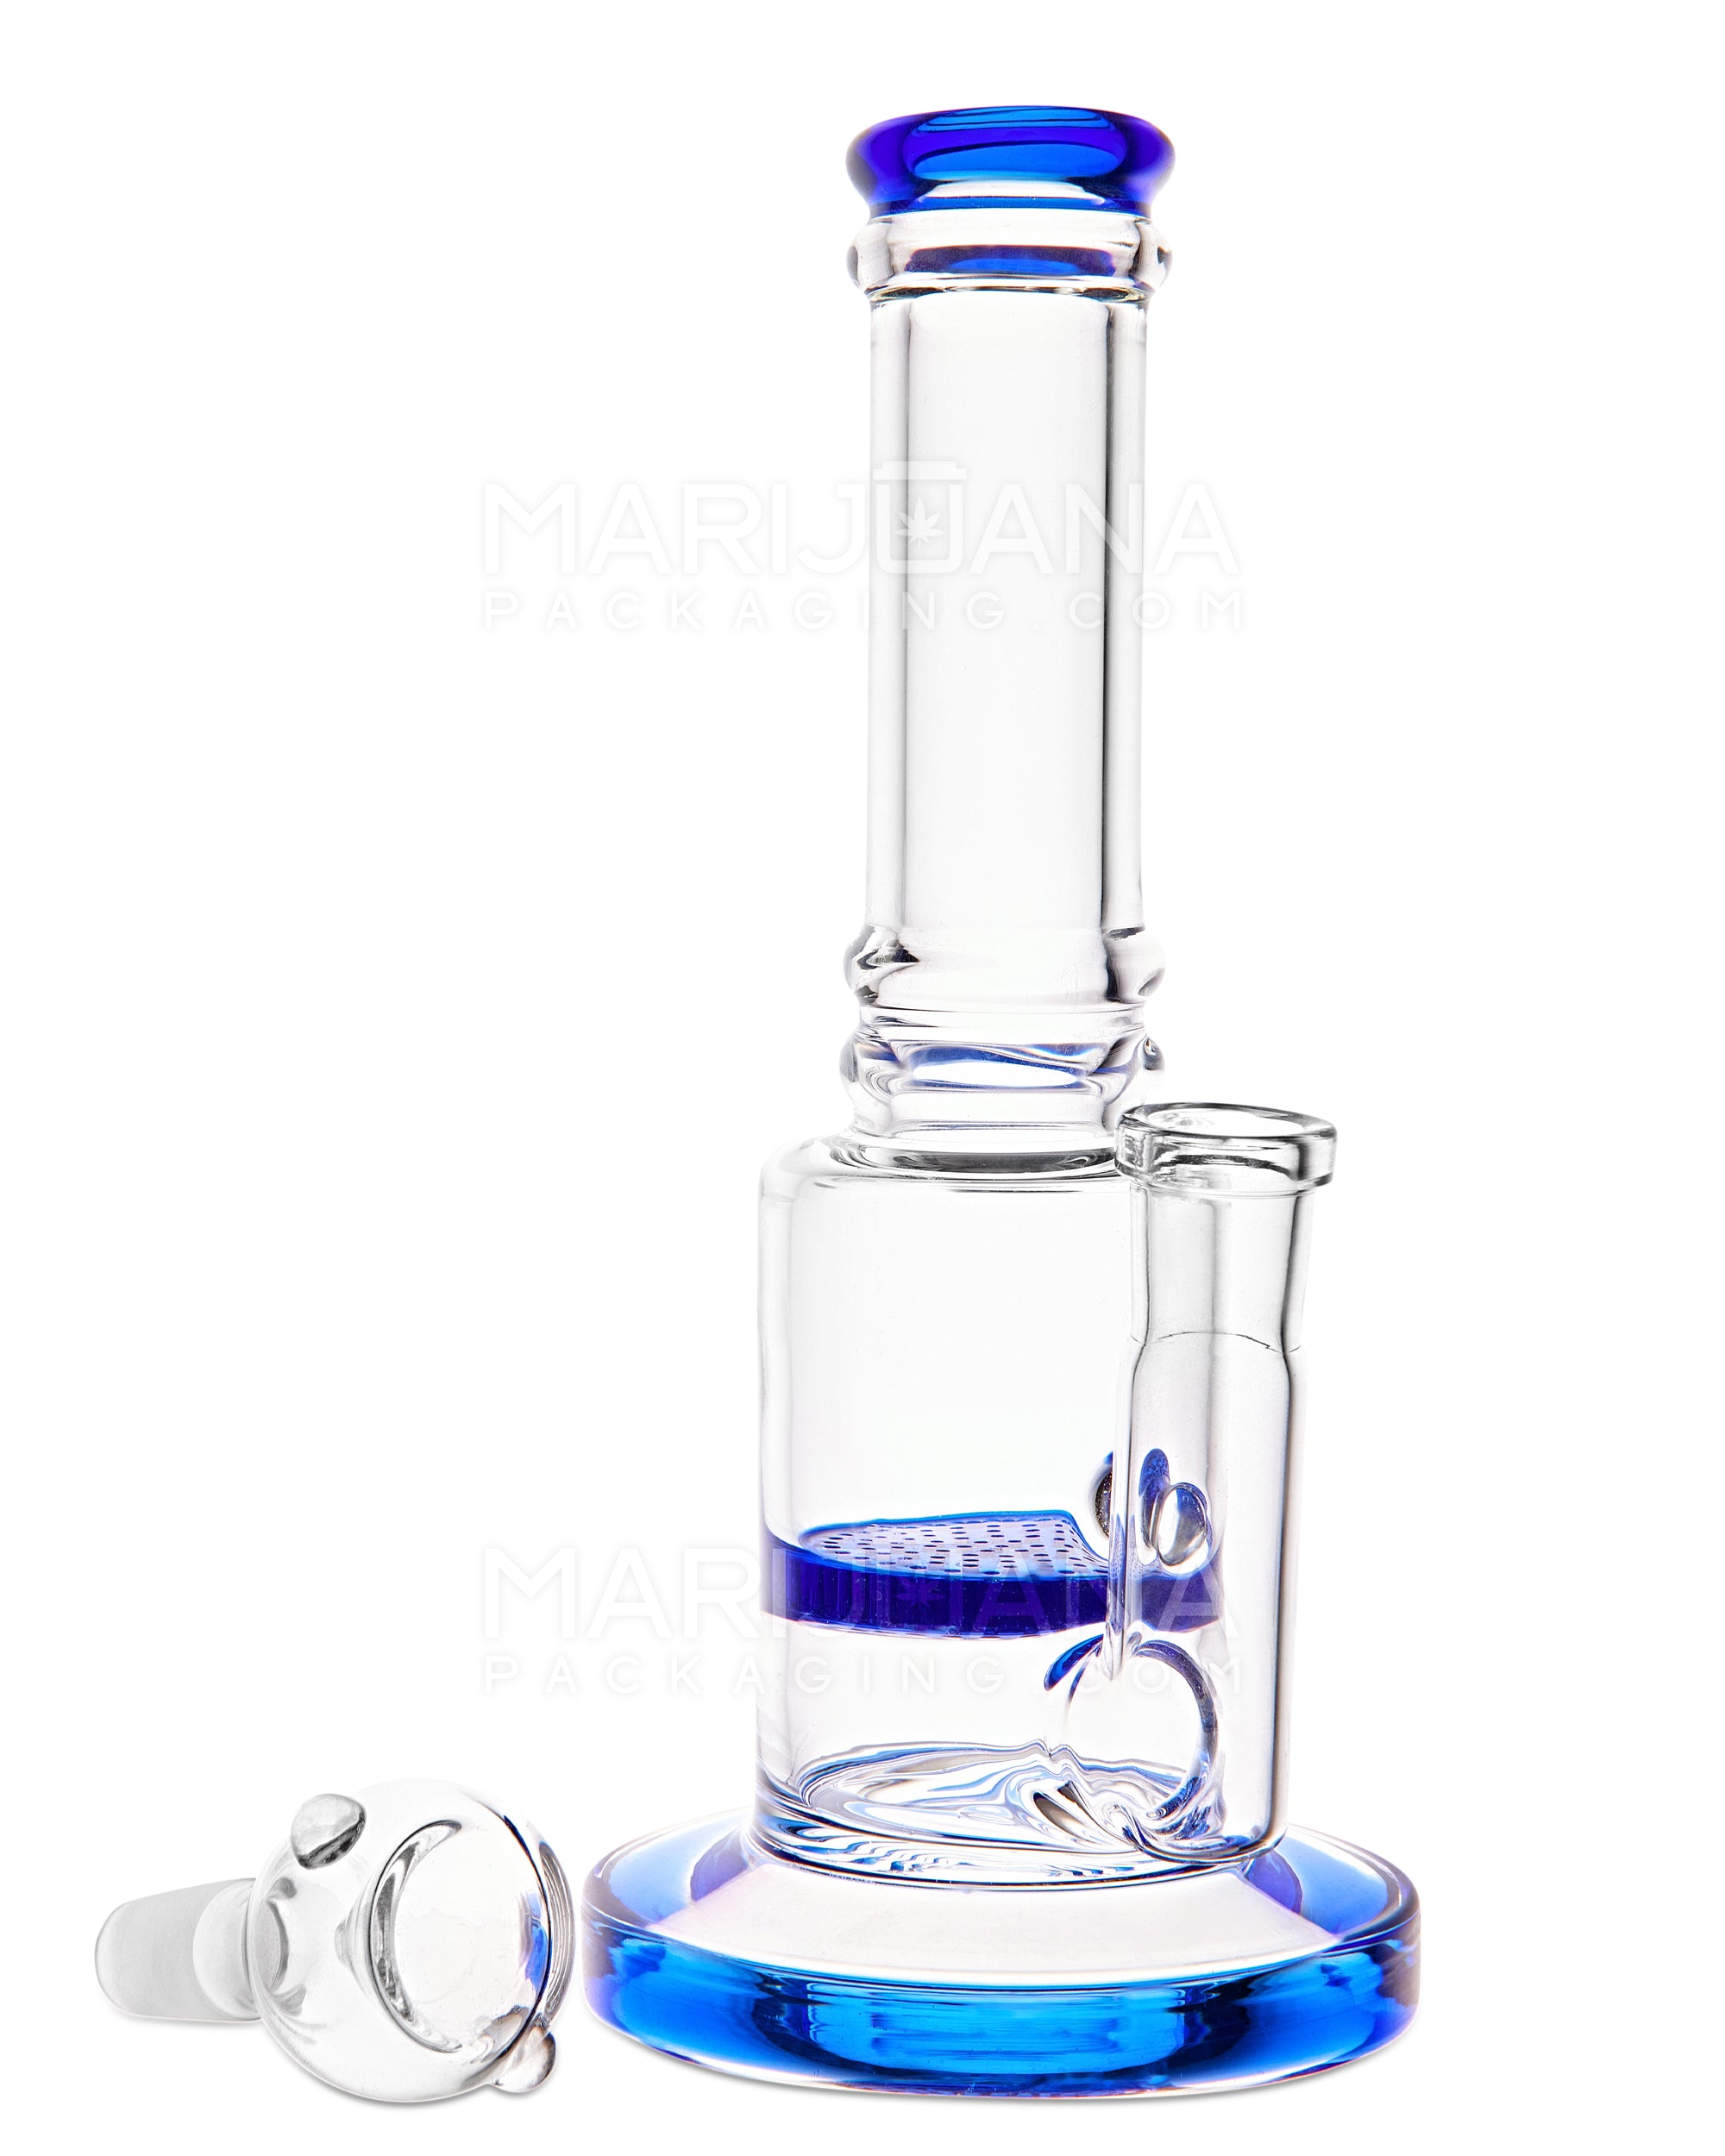 Straight Neck Honeycomb Perc Glass Water Pipe w/ Thick Base | 7.5in Tall - 14mm Bowl - Blue - 2